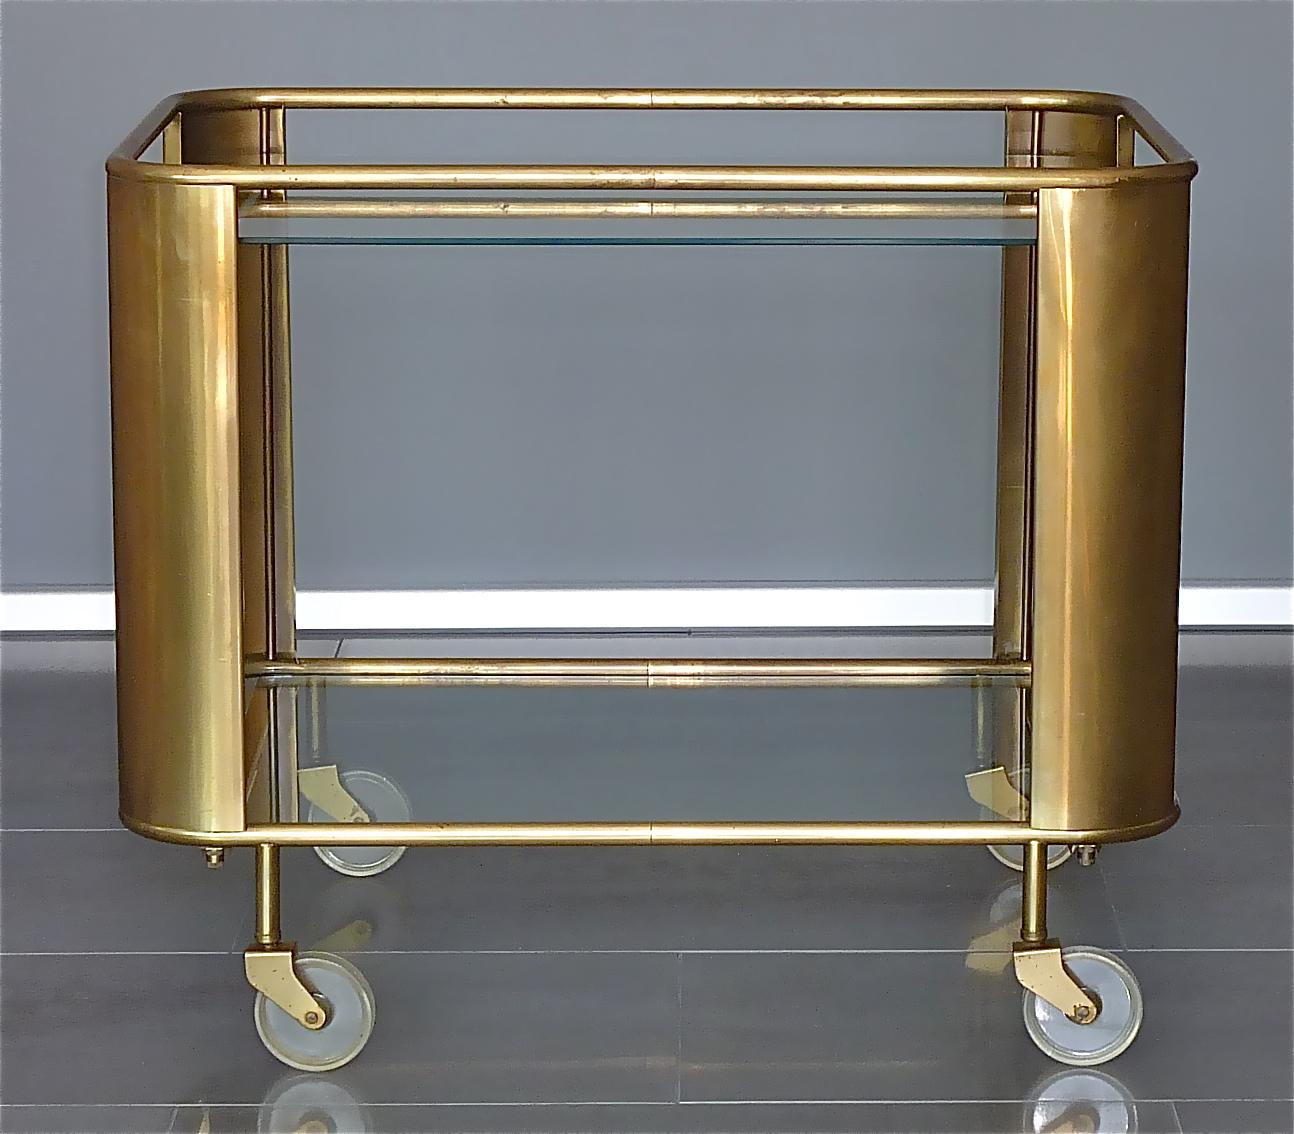 Great vintage modernist Bauhaus / Art Deco bar cart, drinks or serving table trolley on four wheels designed and executed in the 1930s to 1950s in Germany or France. The cool streamline model is made of patinated brass metal, has two glass tiers and